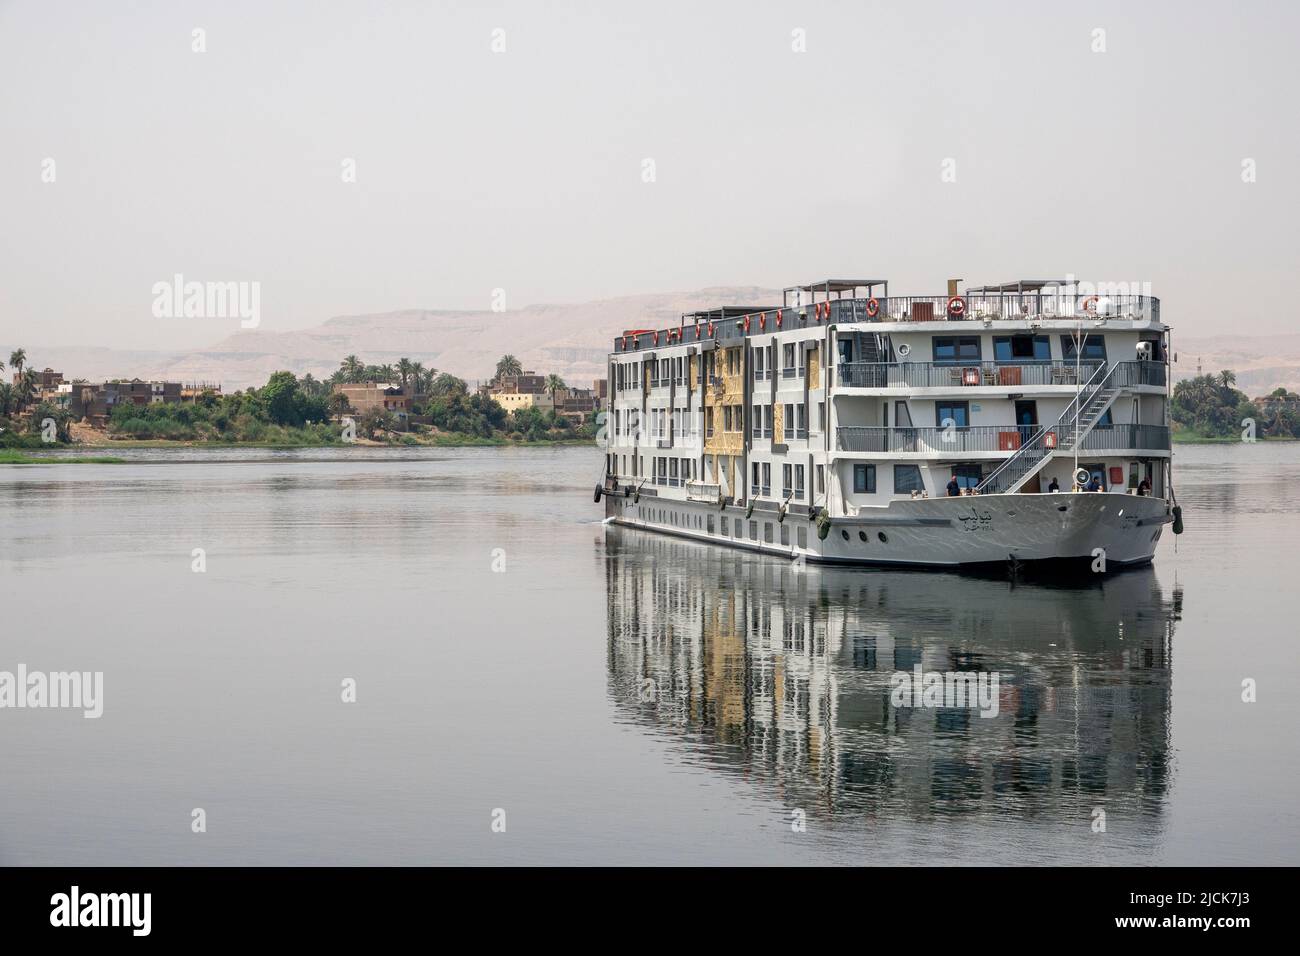 Nile cruise boat sailing at a 45% angle towards camera on calm water with reflections in early morning light Stock Photo